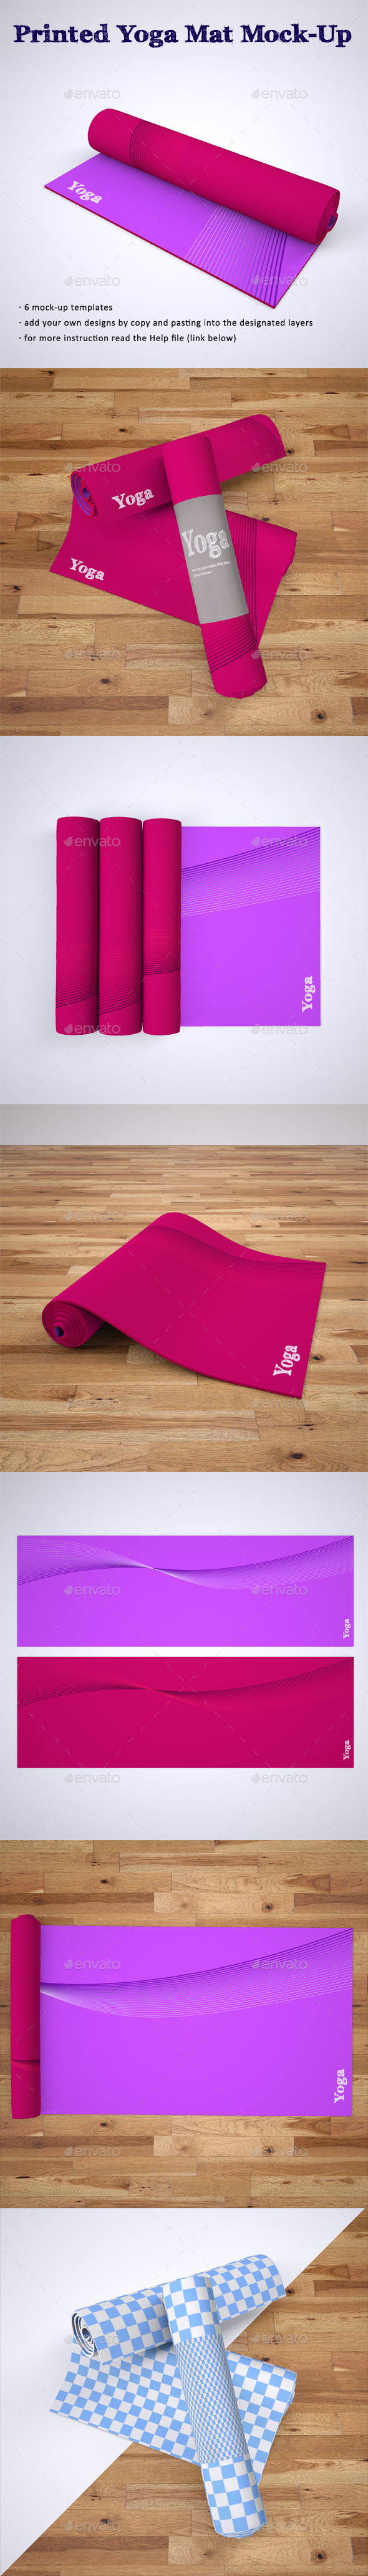 Download Stock Graphic - GraphicRiver Printed Yoga Mat Exercise Rug ...